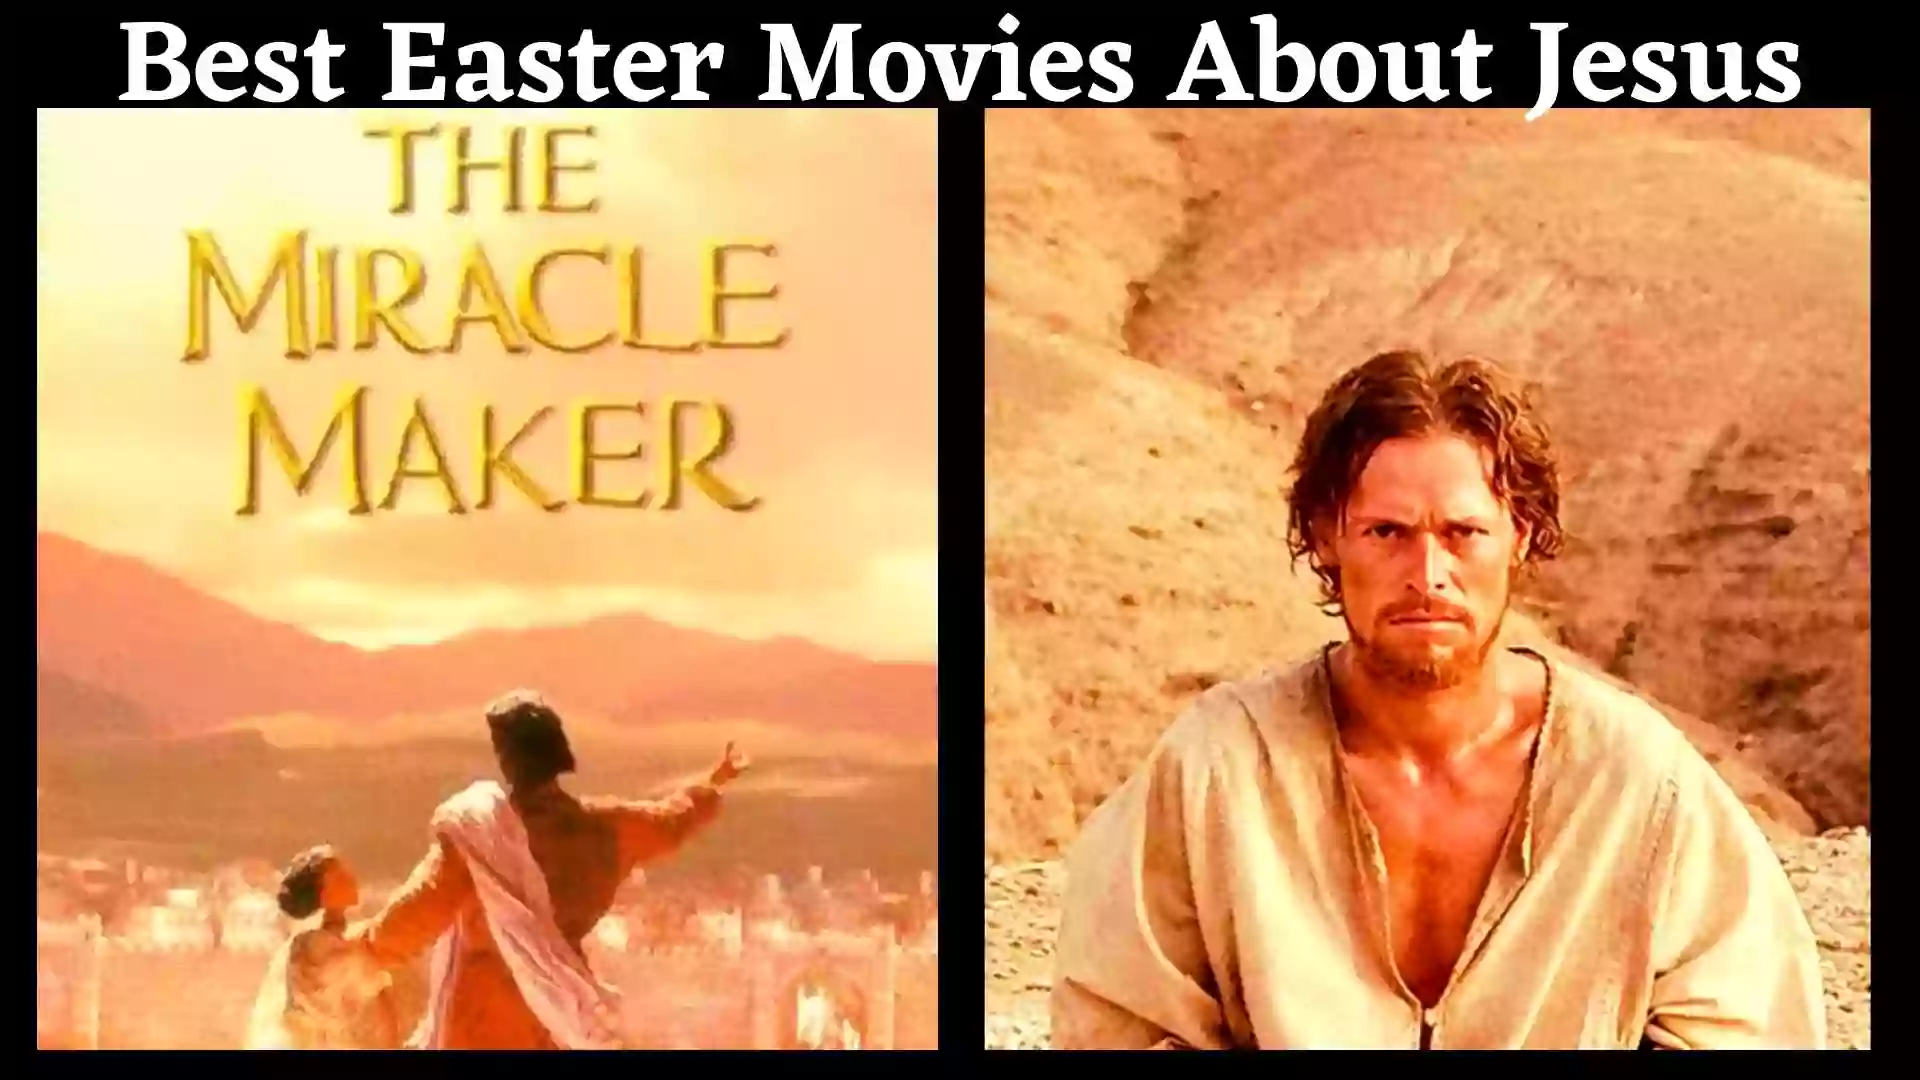 Best Easter Movies About Jesus